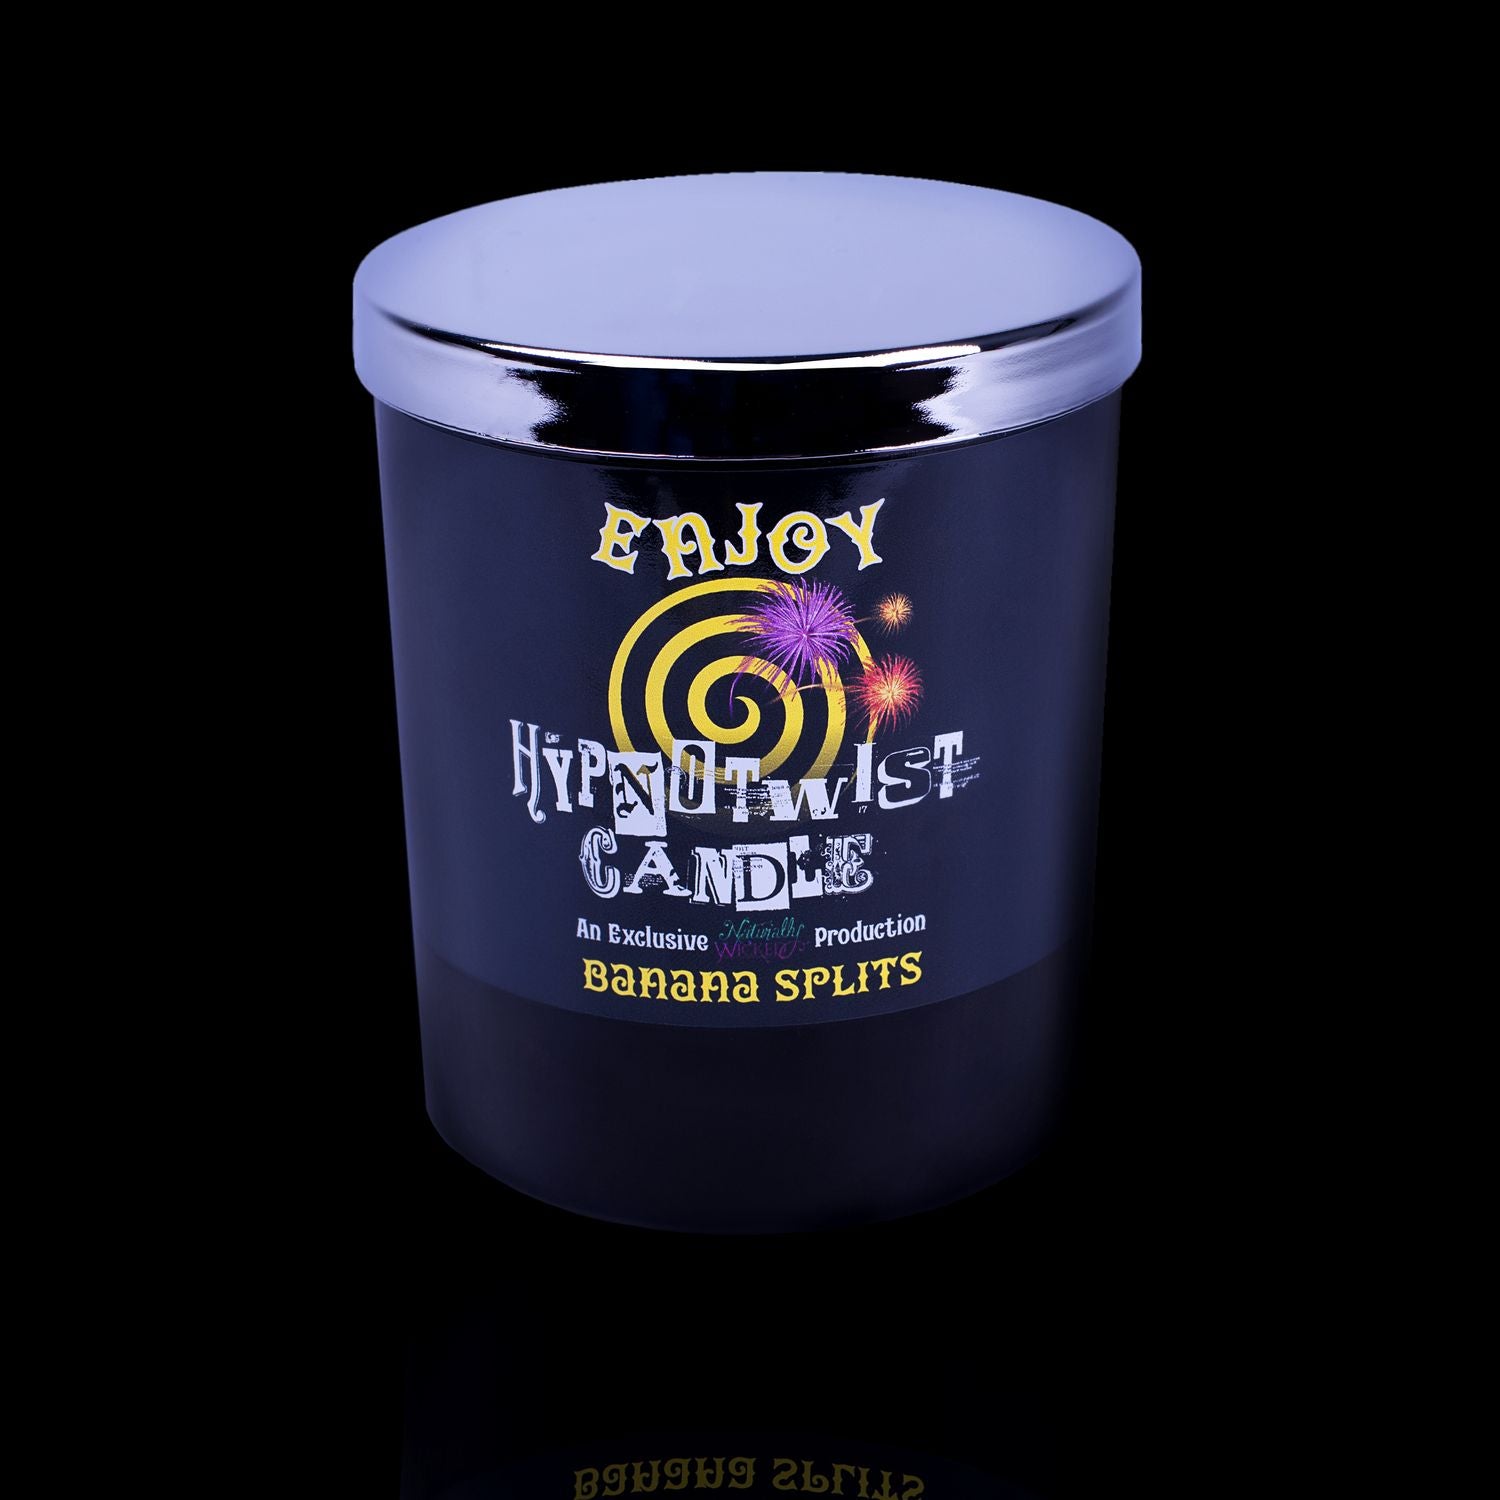 Enjoy Life To The Max With The Naturally Wicked Hypnotwist Enjoy Candle Featuring Plant-based Soy Yellow Wax Scented With Banana Splits & Includes A Yellow Jade Crystal Spinning Top & Mirrored Lid